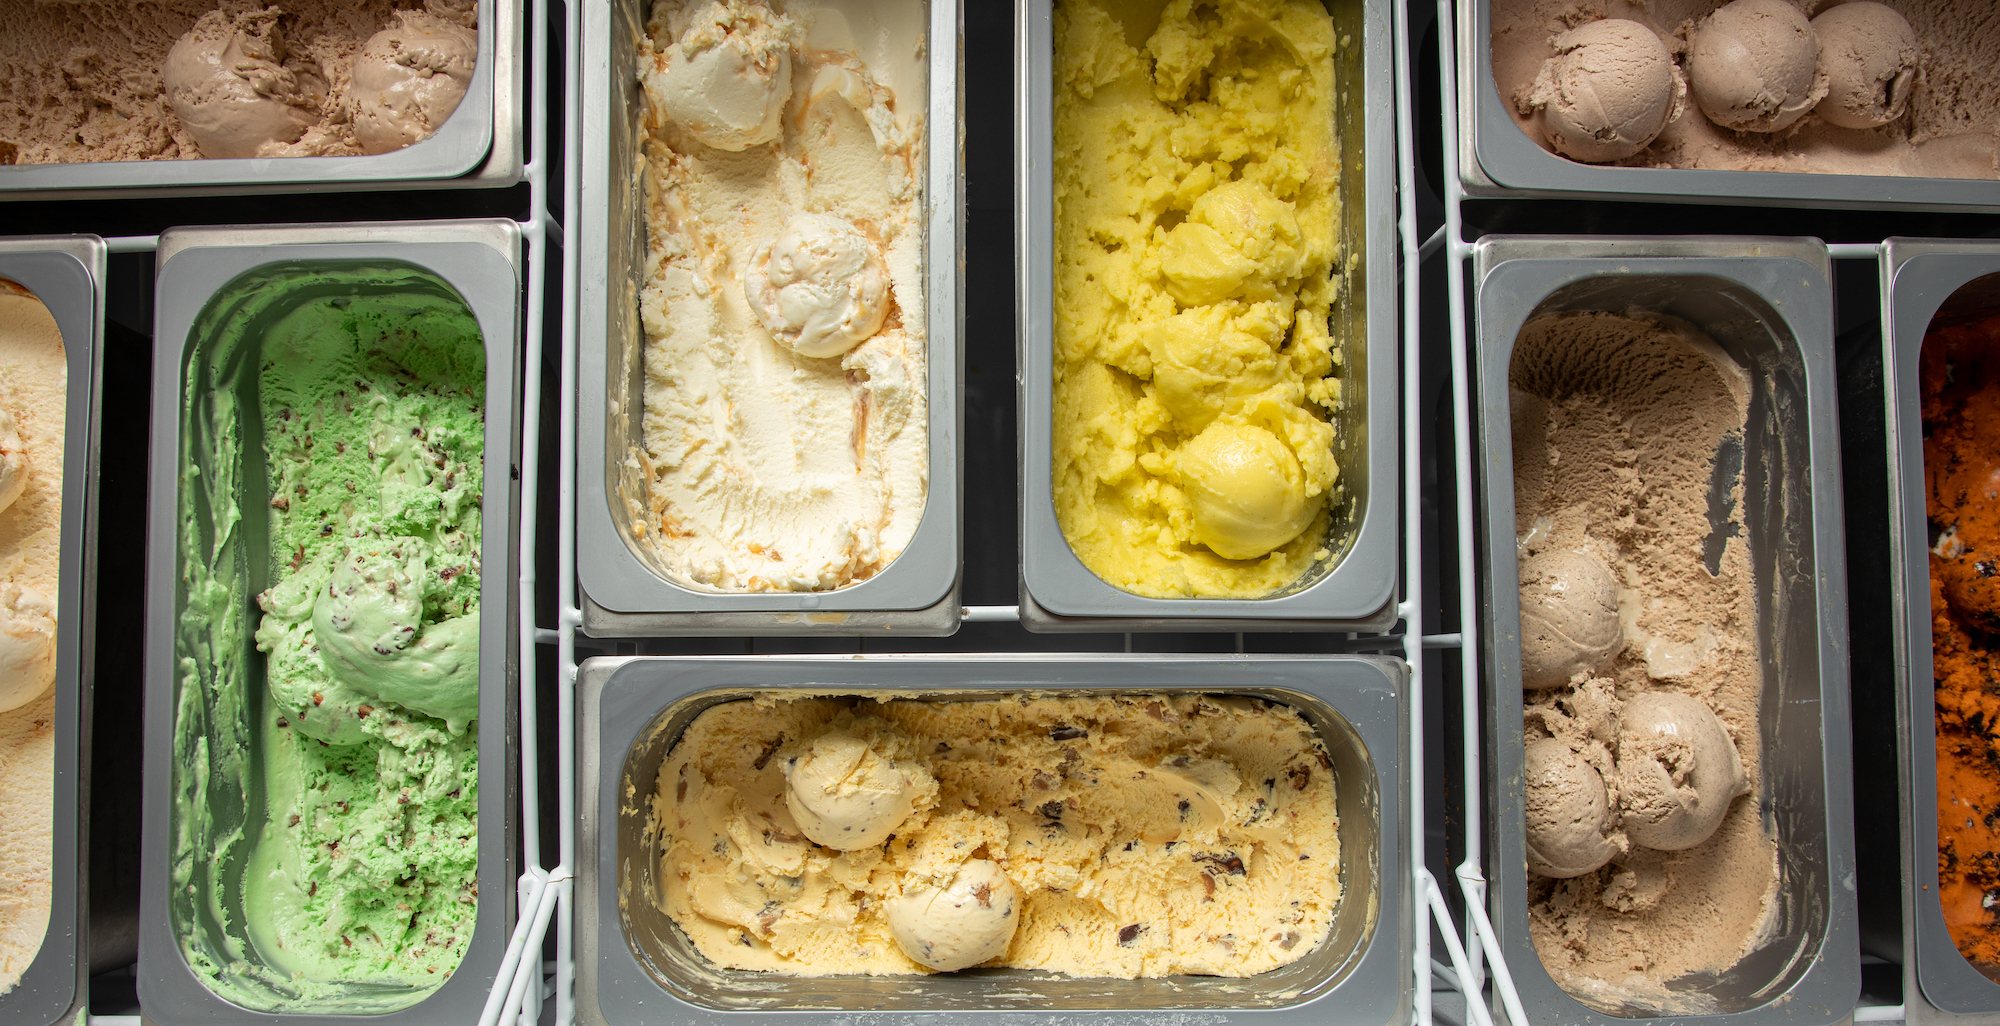 A case of seven different ice cream flavors lined up in metal bins, in green, yellow, and cream colors. 